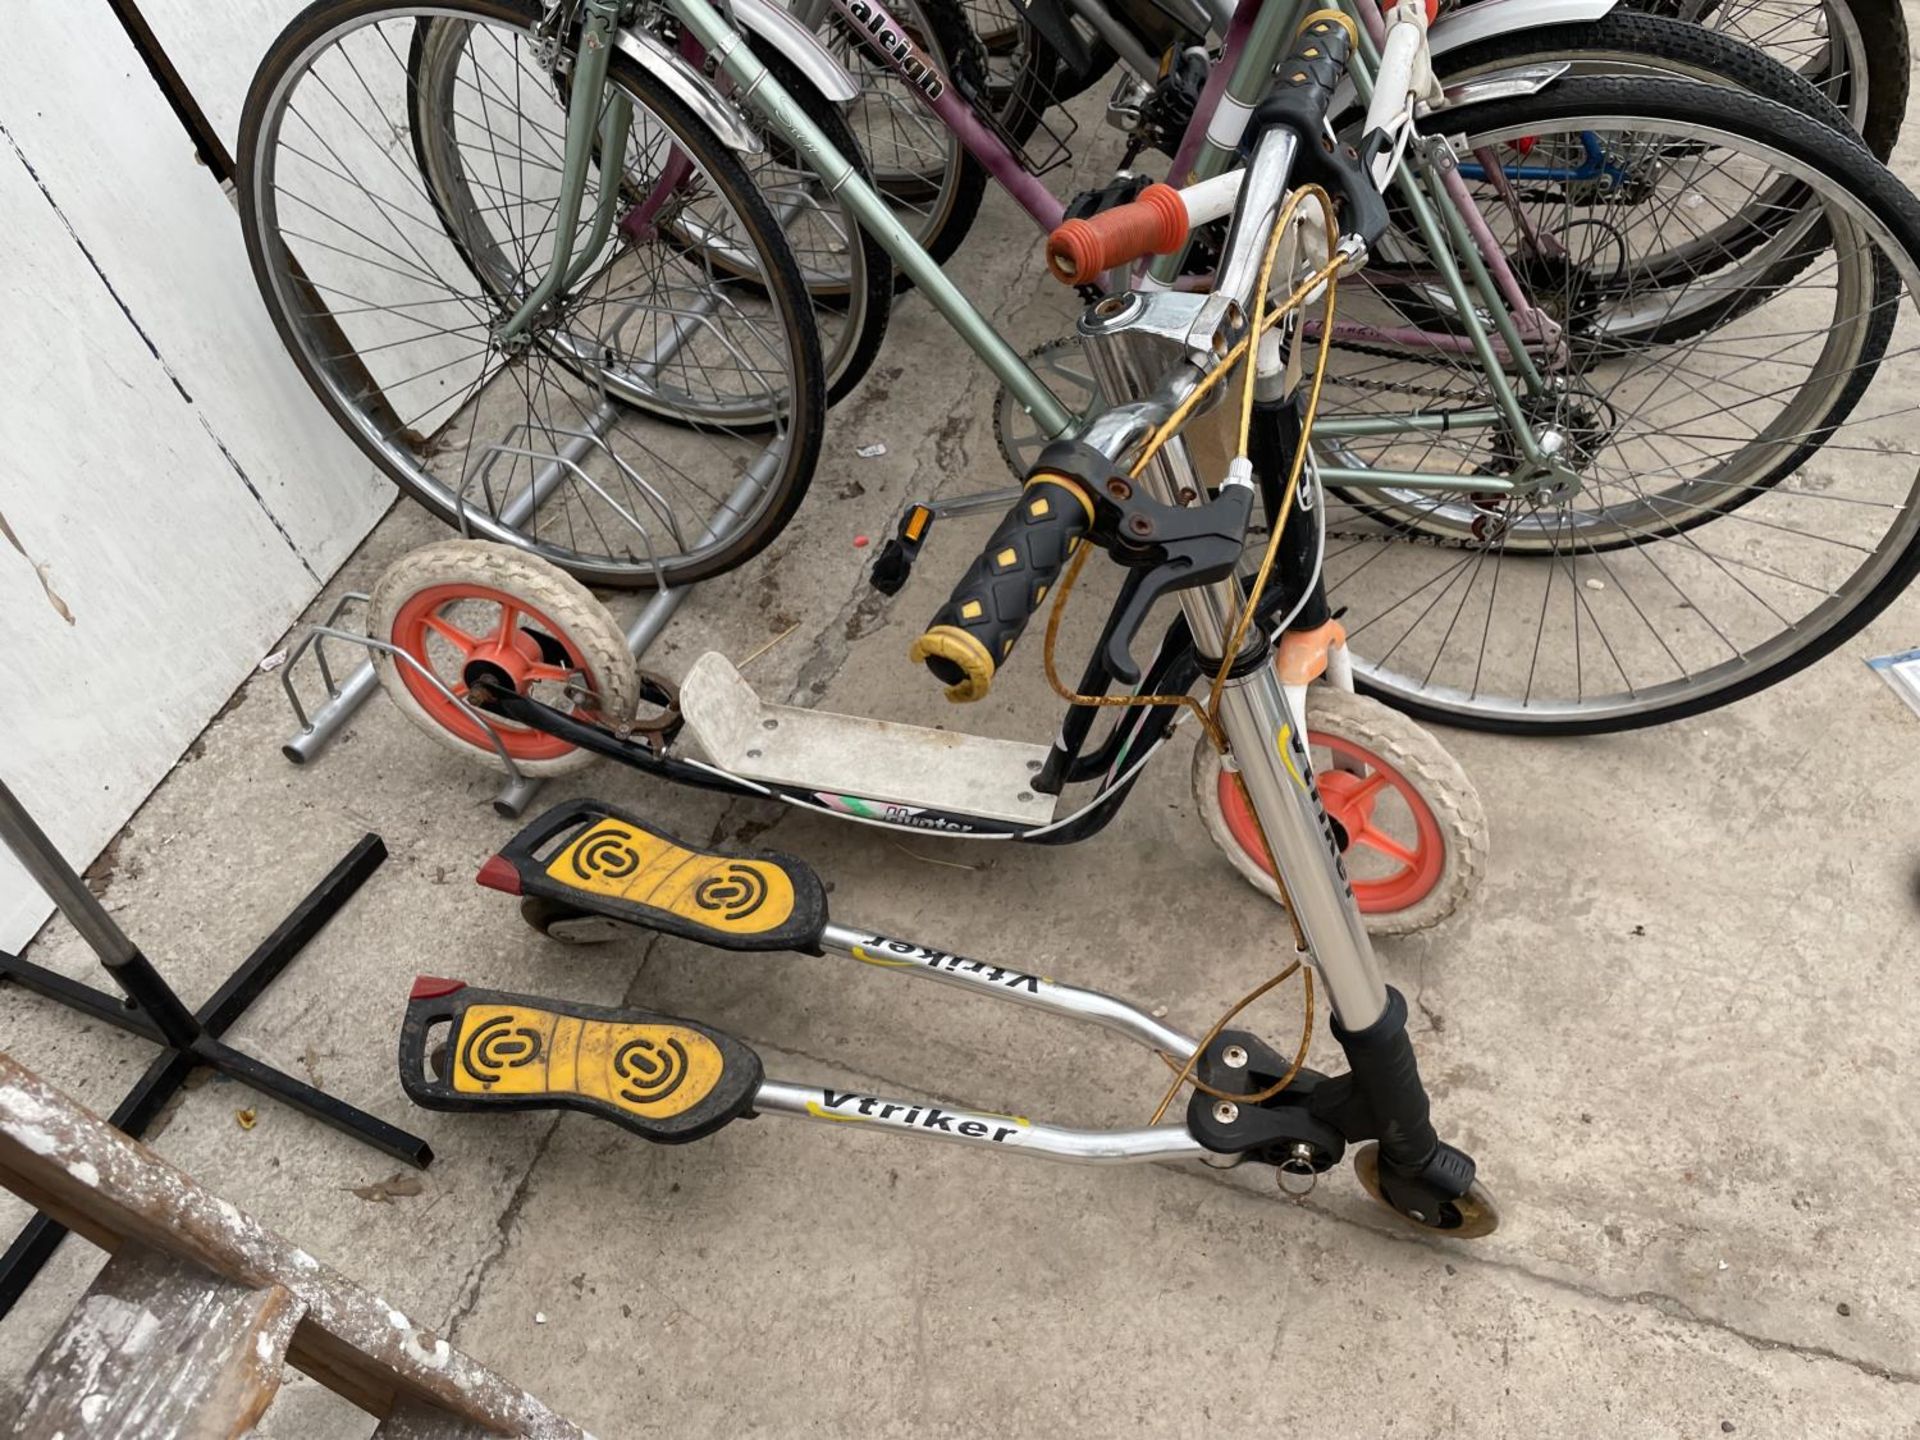 TWO CHILDRENS SCOOTERS TO INCLUDE A VTRIKER